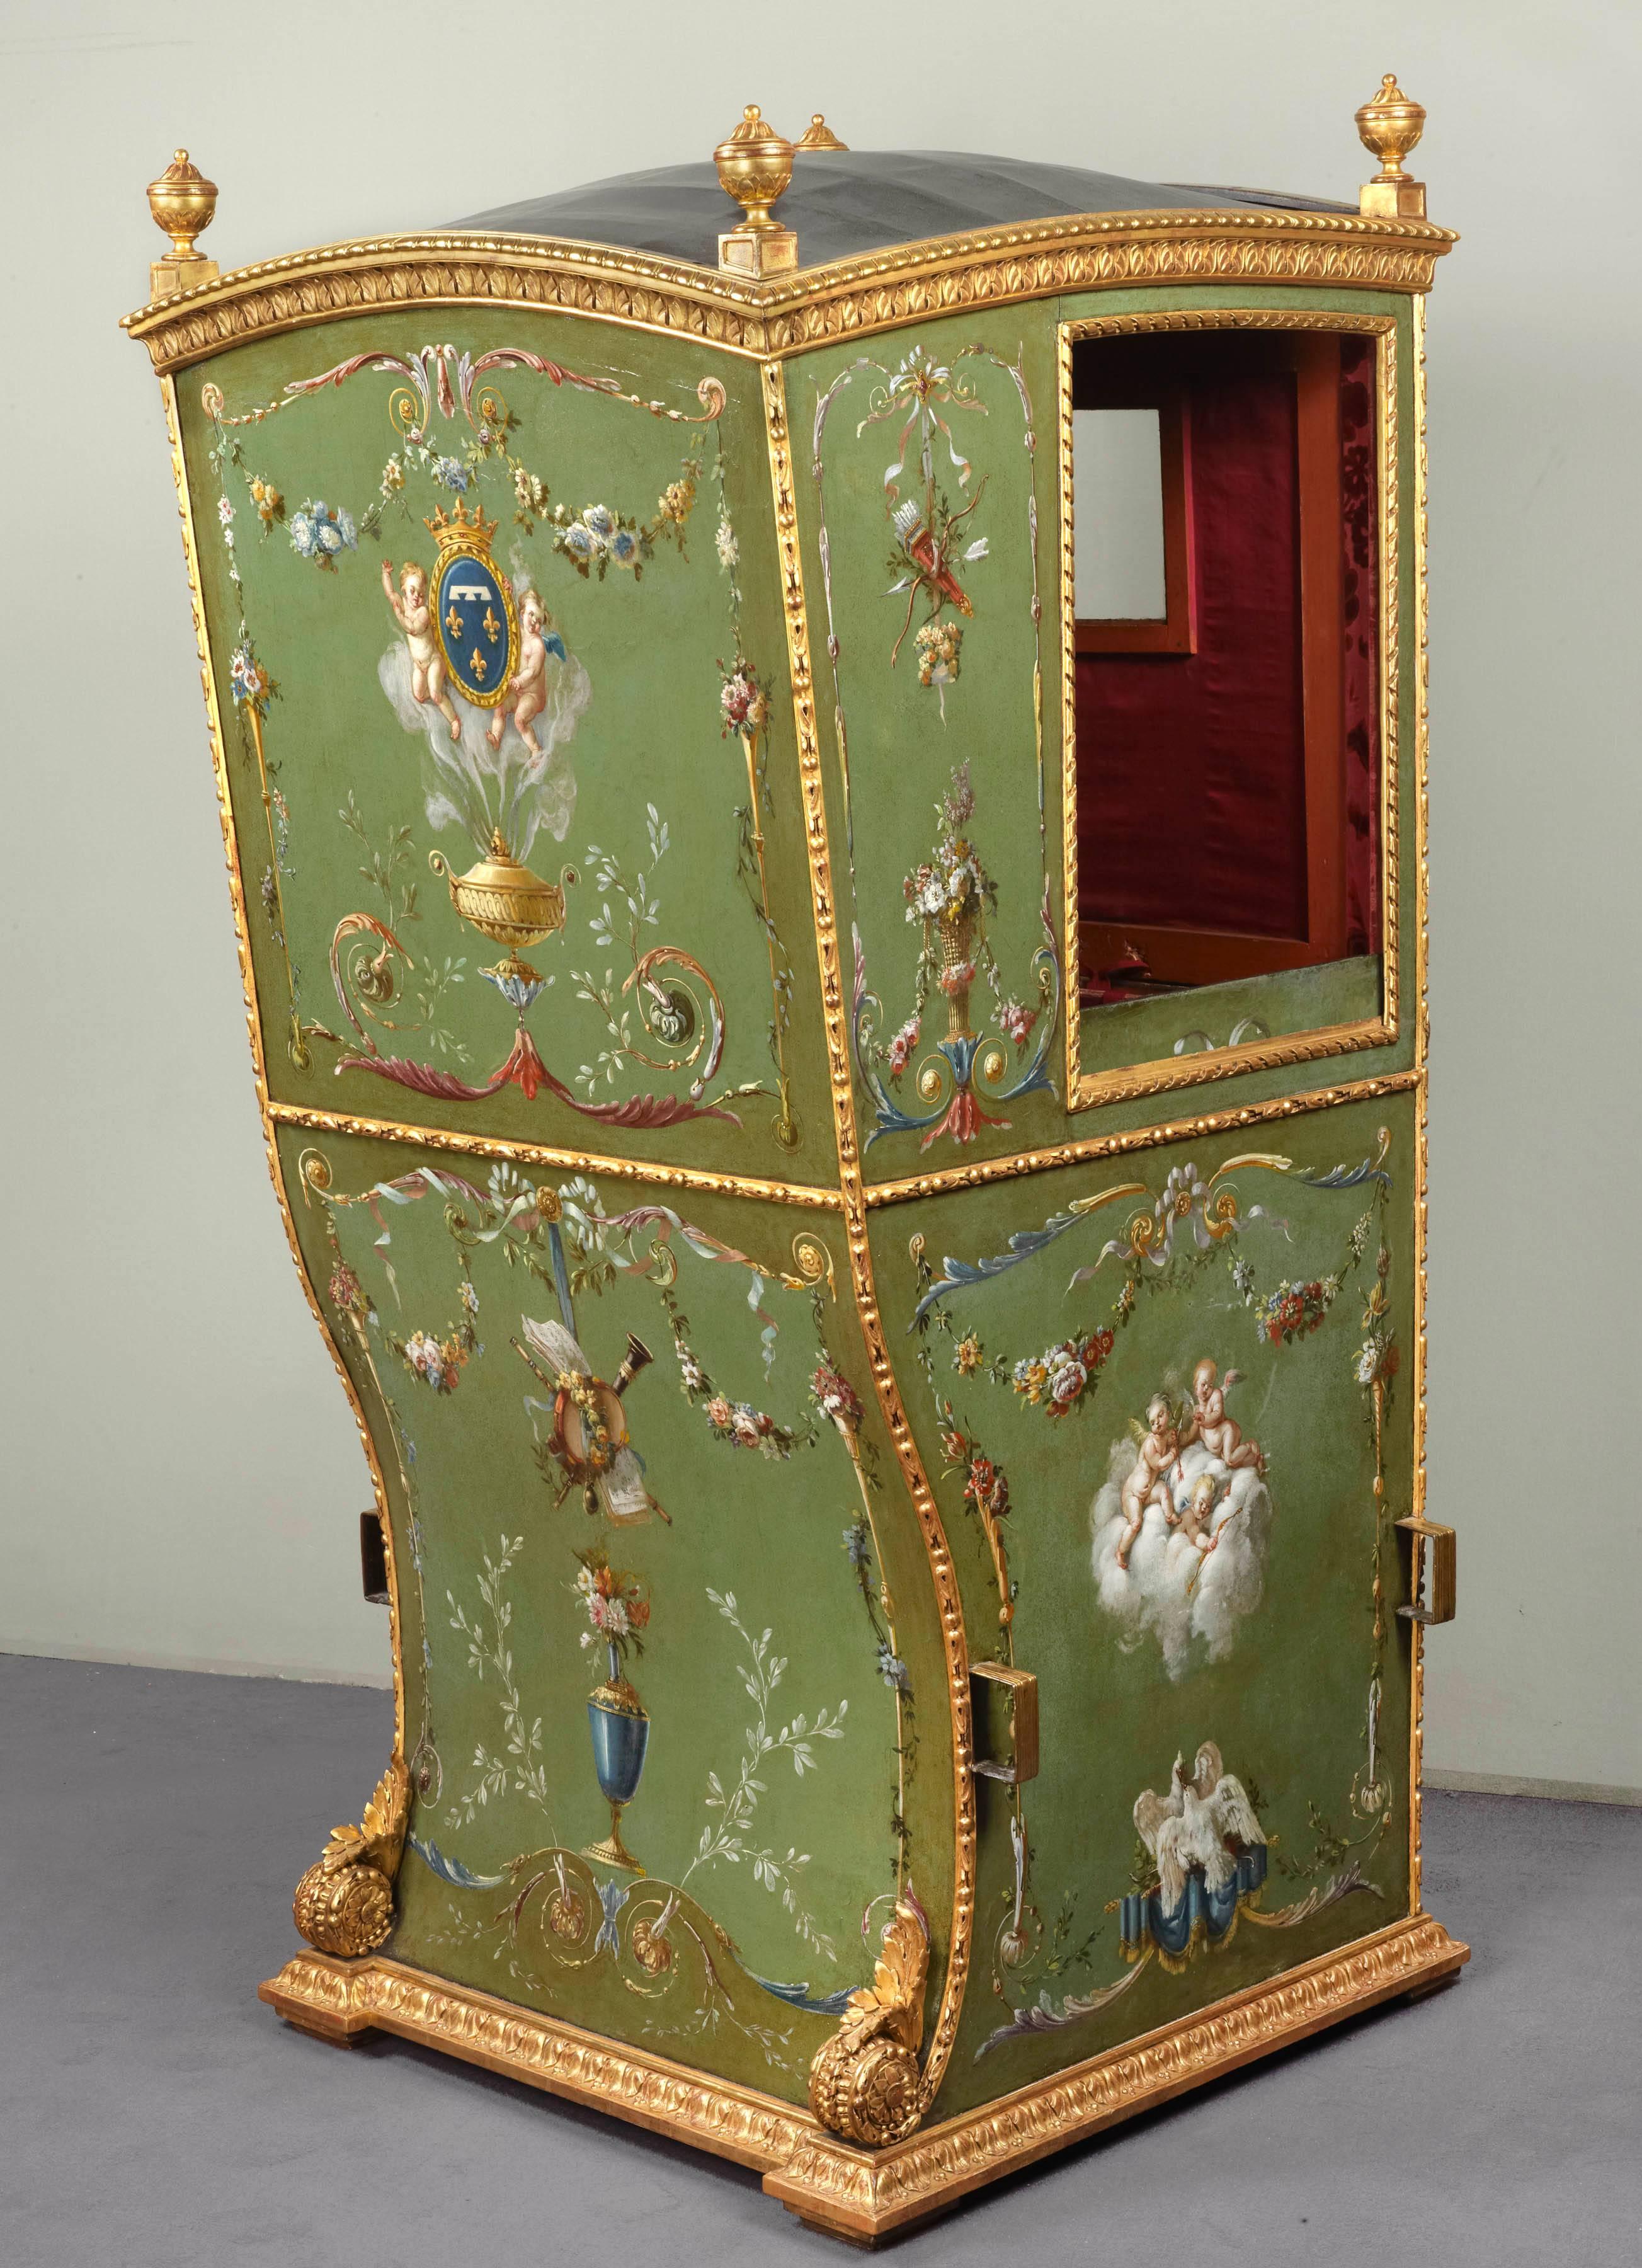 A Louis XVI leather and giltwood Sedan chair; the domed gadrooned moulded cornice is surmounted by turned finials, above there is a stiff-leaf carved frieze, the uprights are carved with berried-husks, the panelled sides with ribbon, on a berried